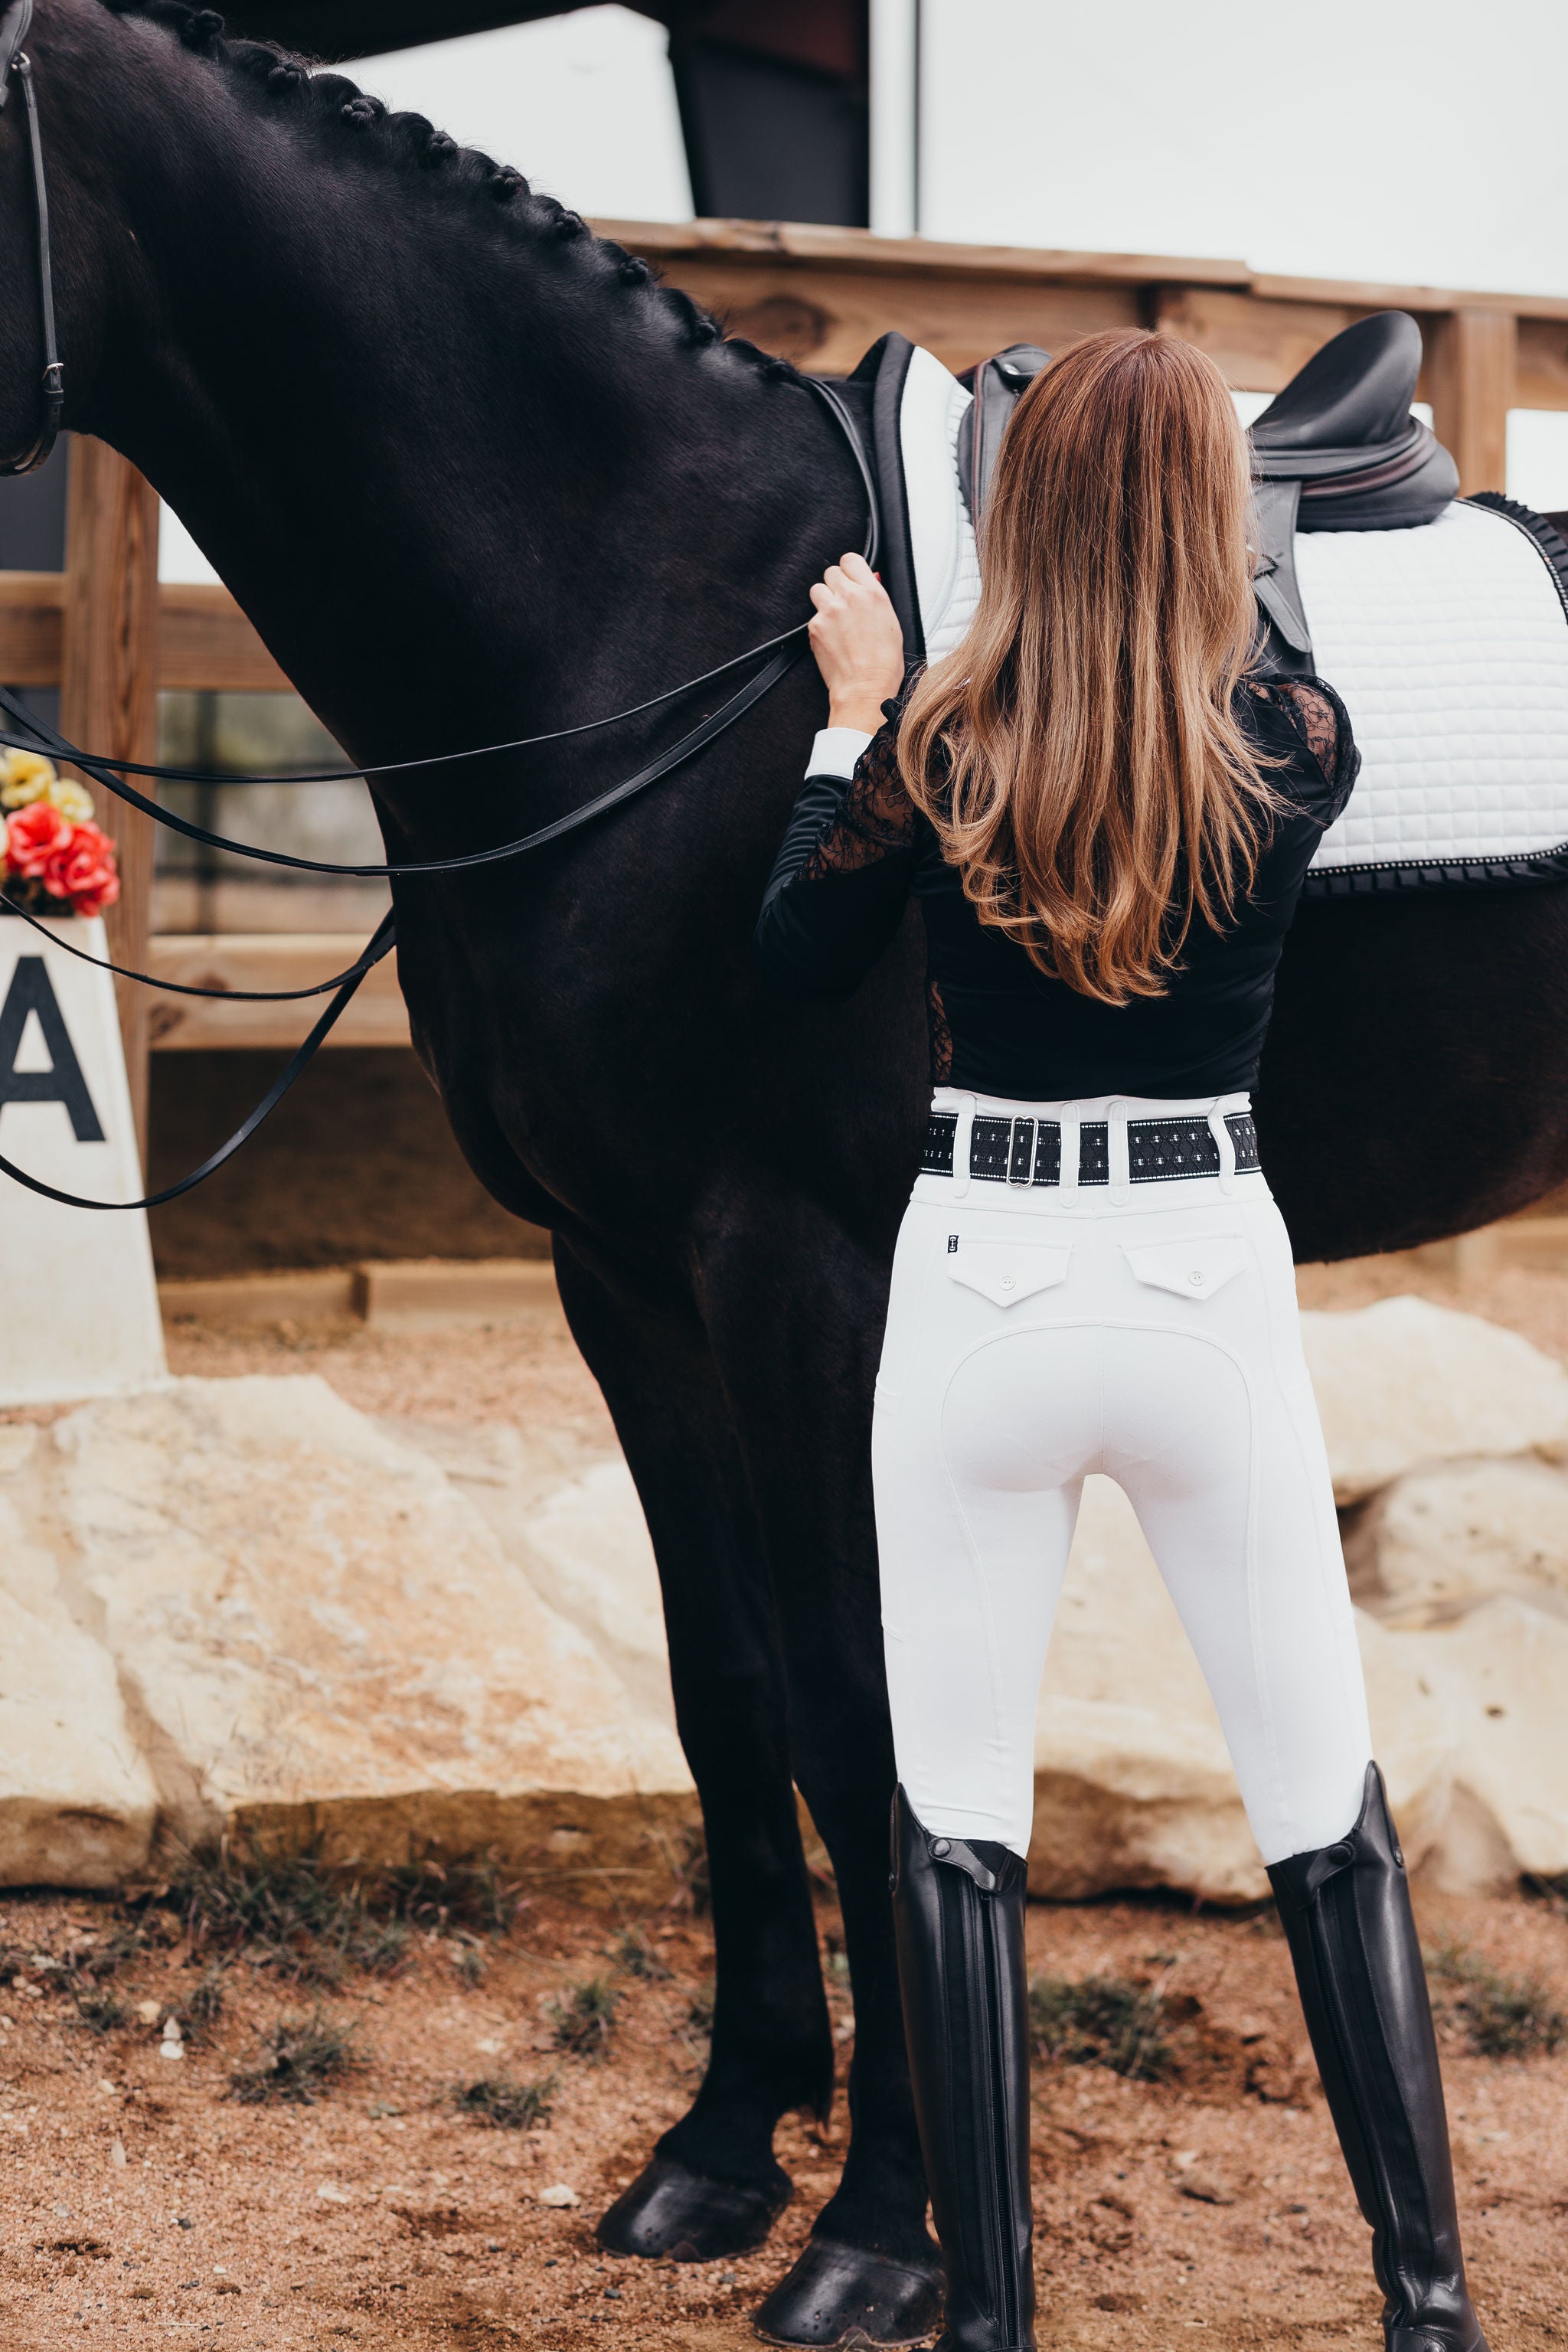 Canter Culture's white competition breeches are the most comfortable to show in.